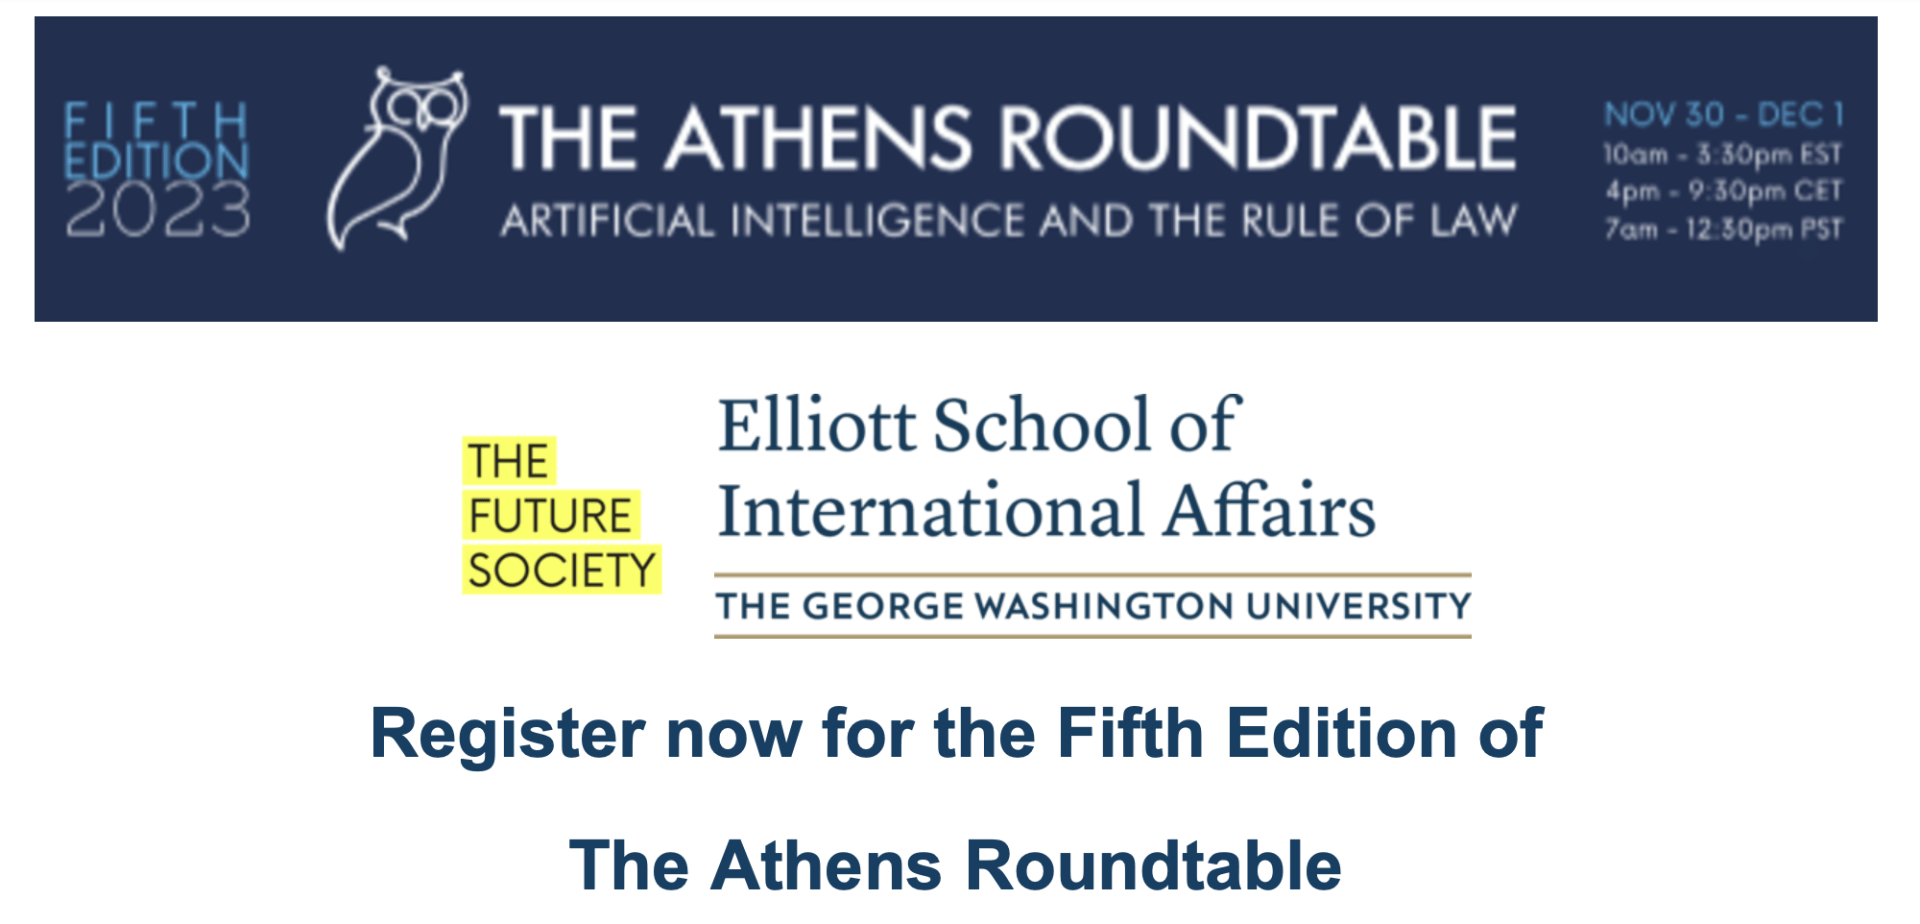 Fifth Edition 2023 The Athens Roundtable Artificial Intelligence and the Rule of Law Nov 30-Dec 1 The Future Society Elliott School of International Affairs The George Washington University Register now for the Fifth Edition of the Athens Roundtable